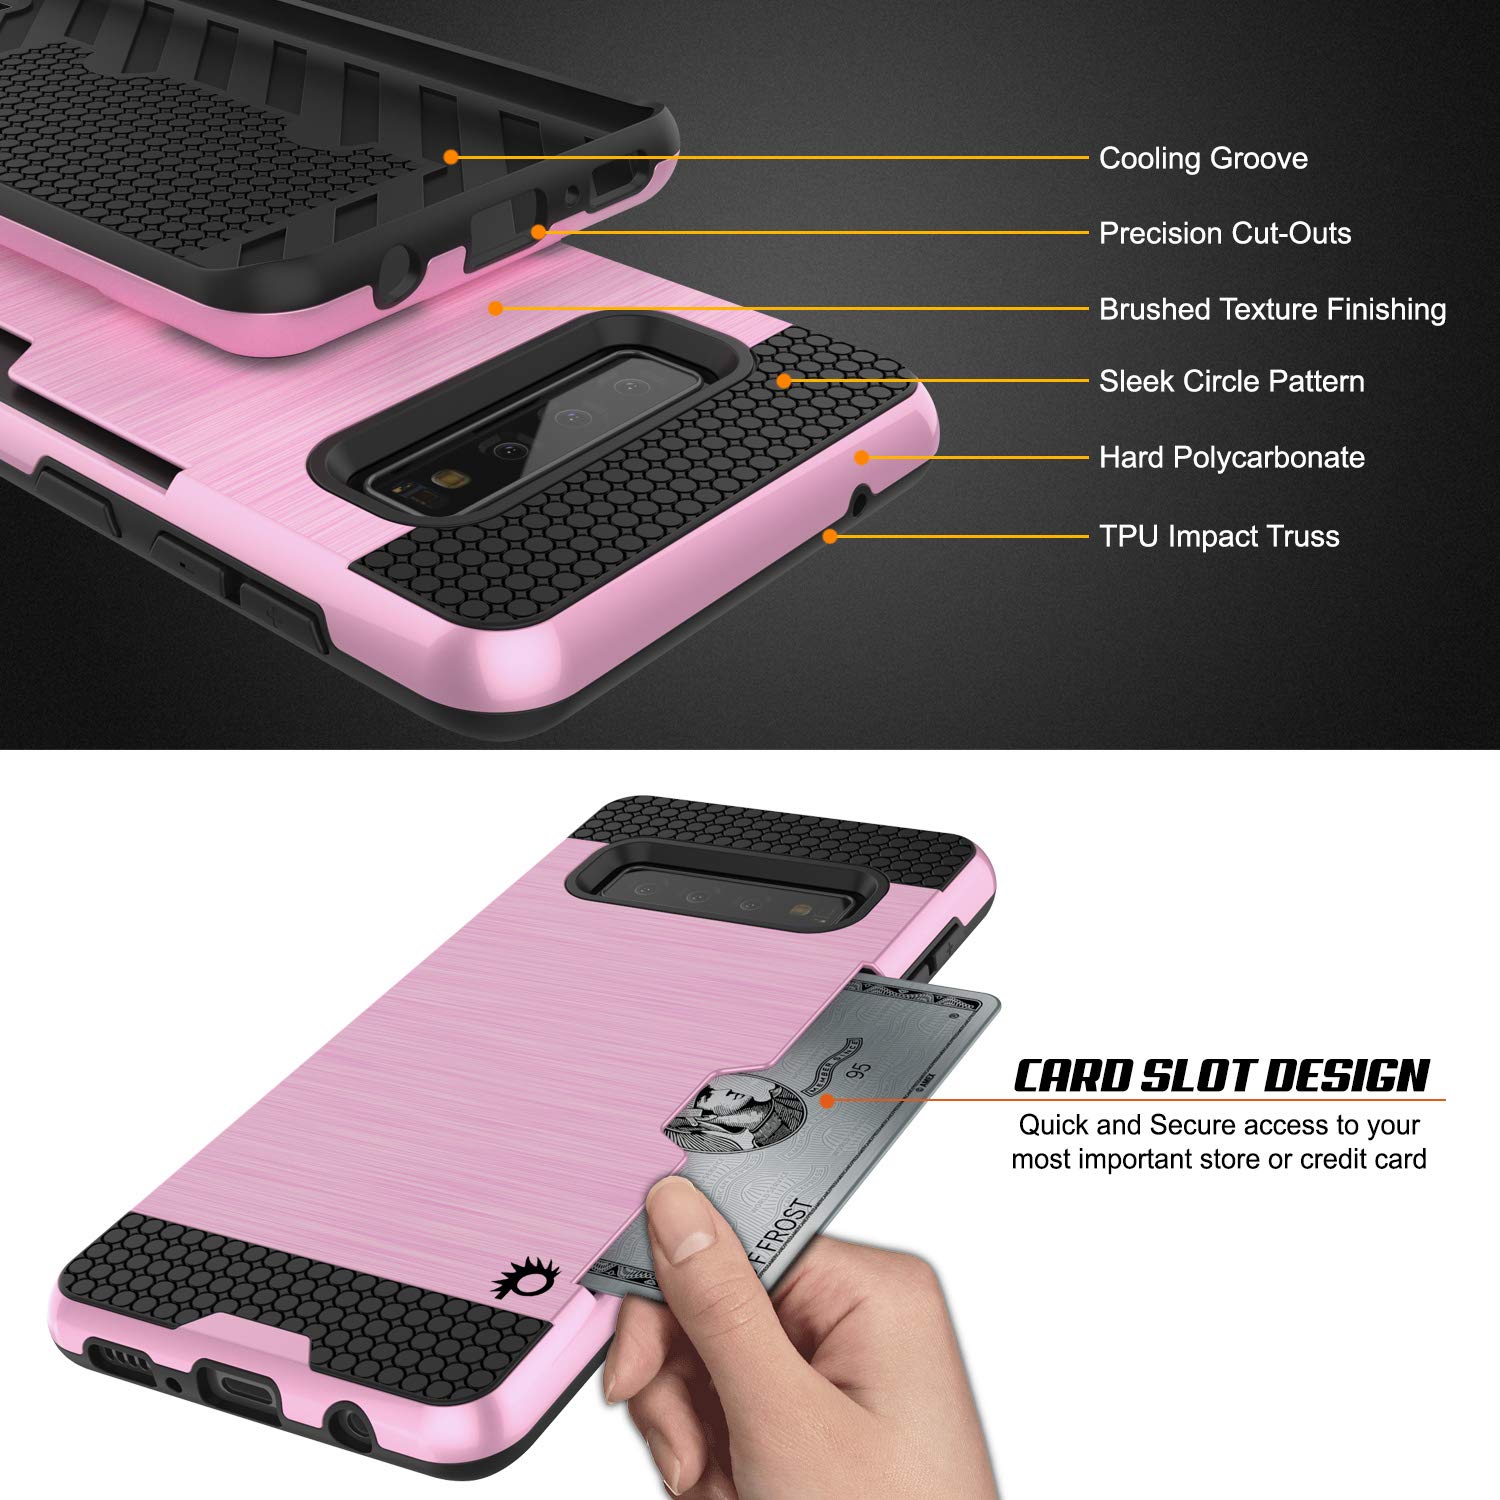 Galaxy S10 Case, PUNKcase [SLOT Series] [Slim Fit] Dual-Layer Armor Cover w/Integrated Anti-Shock System, Credit Card Slot [Pink]